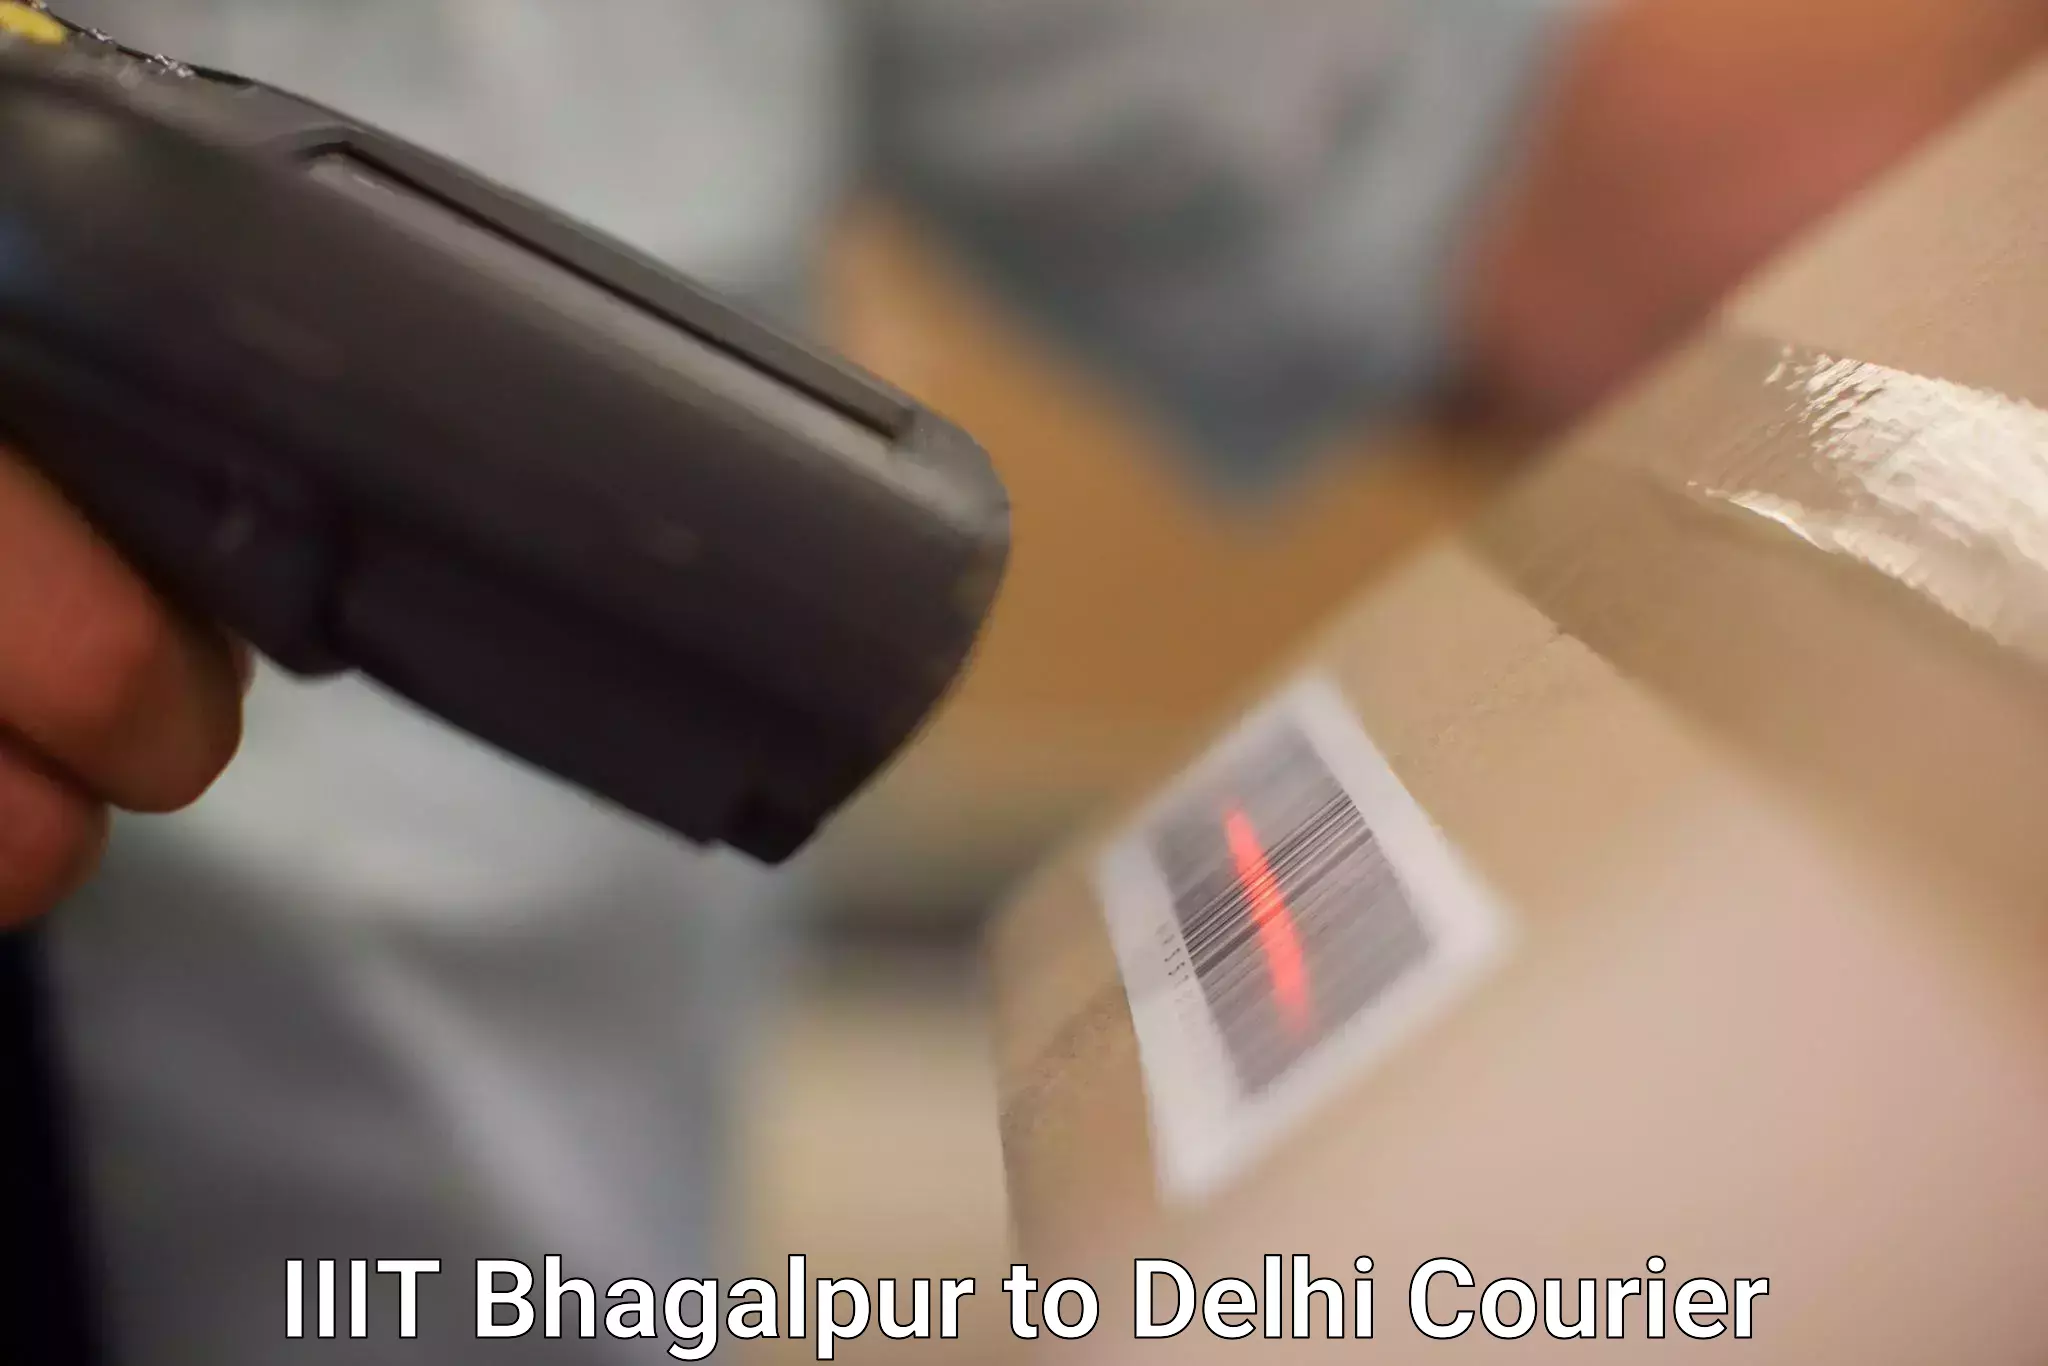 Large-scale shipping solutions IIIT Bhagalpur to University of Delhi